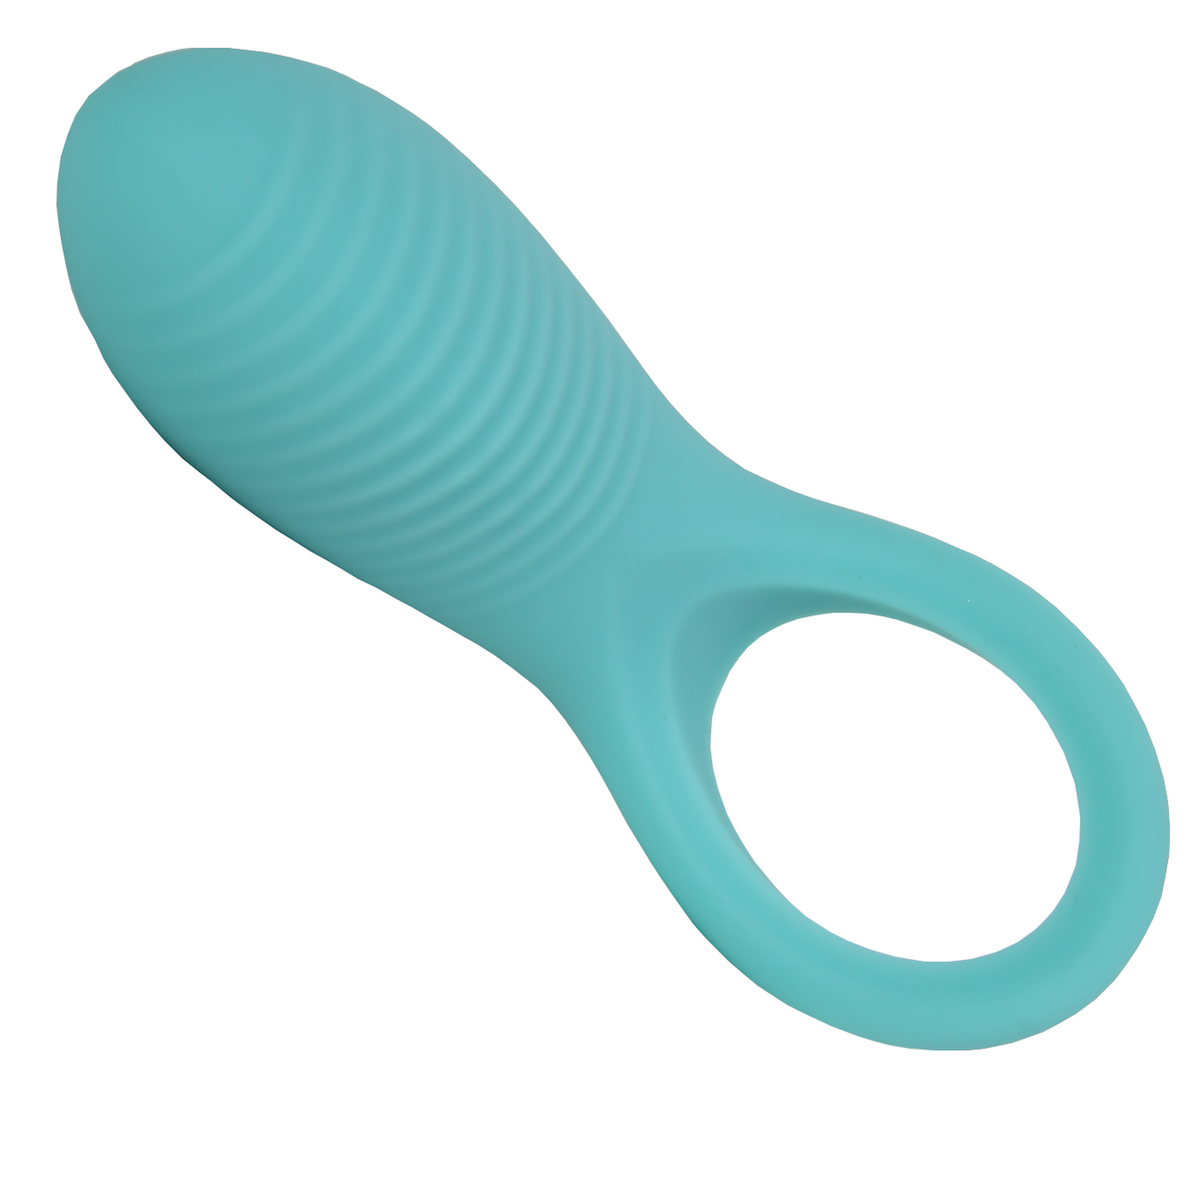 Teal vibrating cock ring for couples